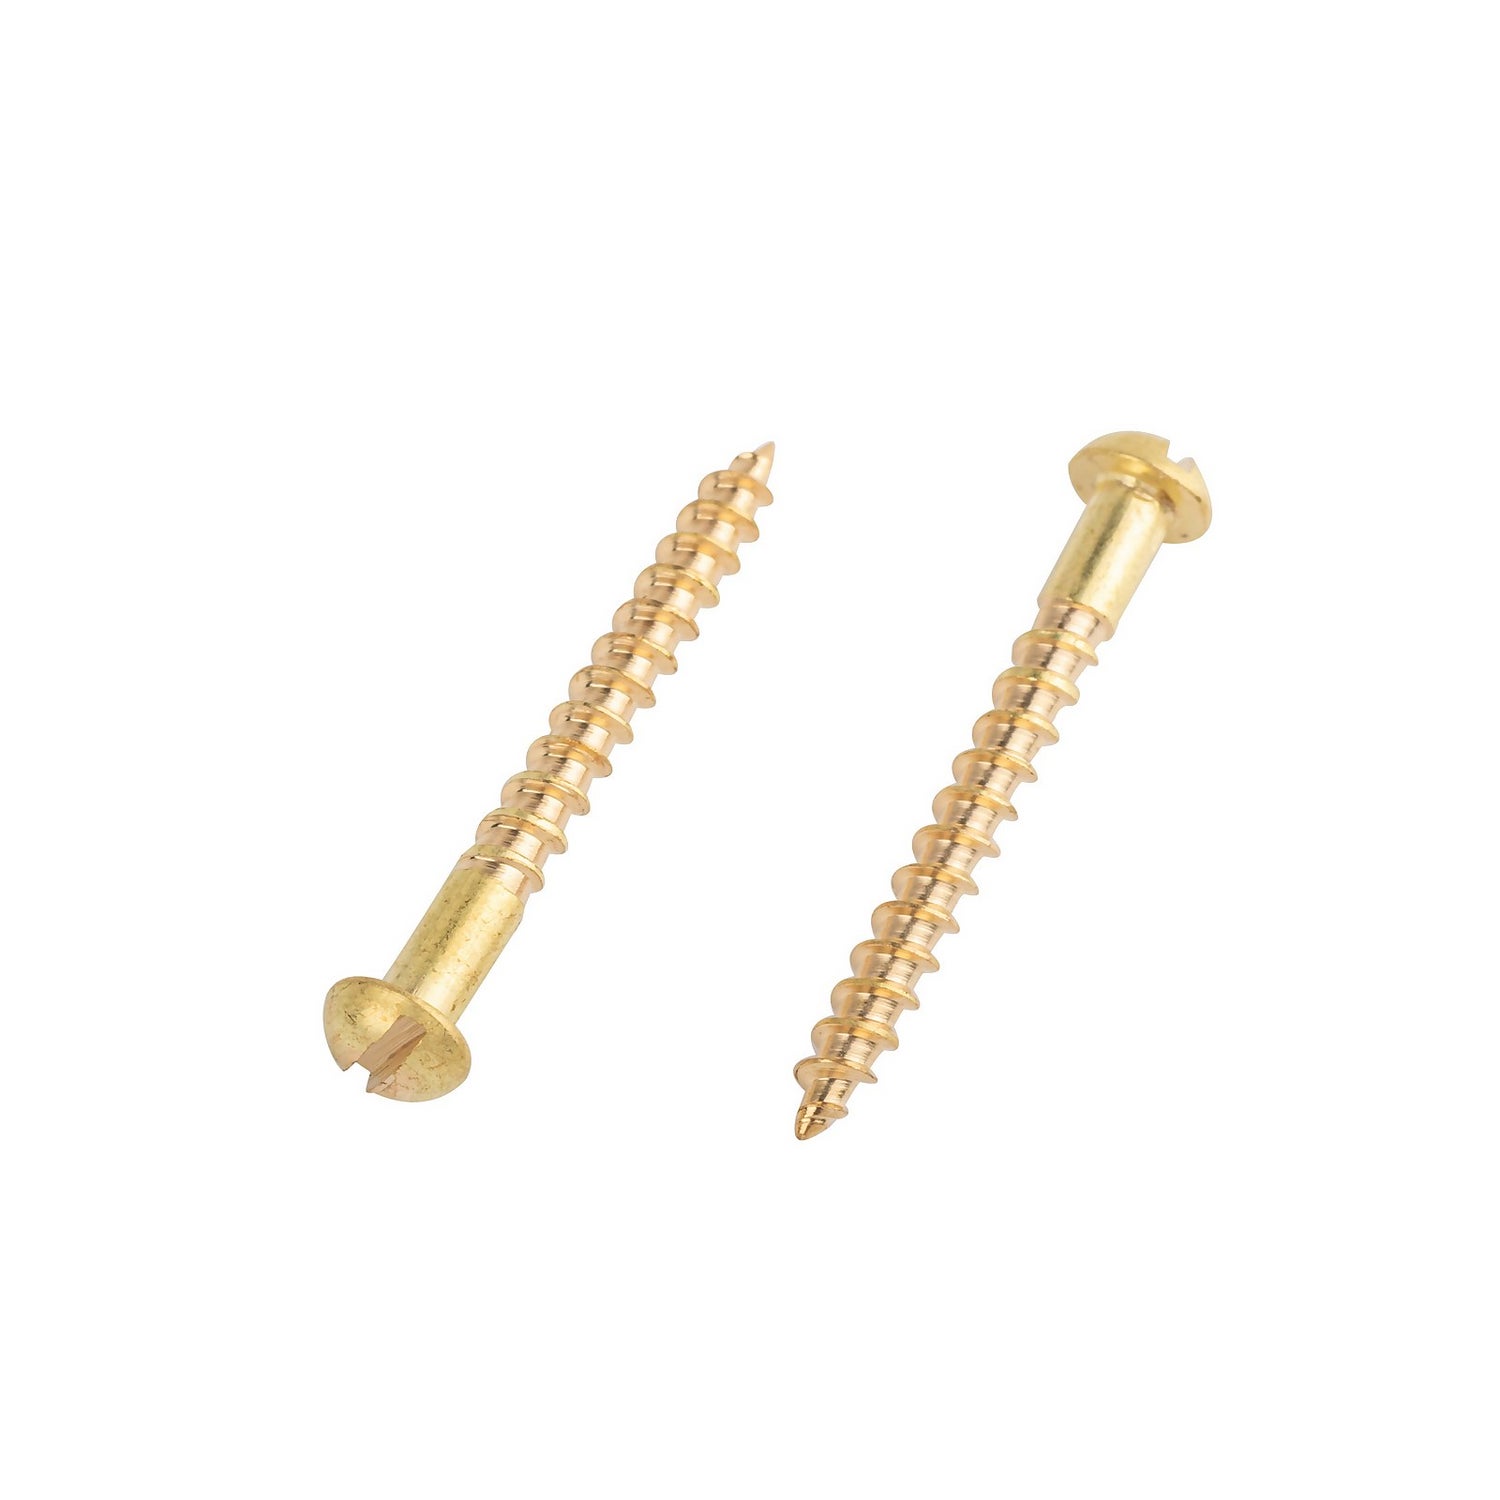 Antique Brass-Plated Wood Screw, Oval Head, Square Drive, Regular Thread,  Regular Wood Point - Reliable Fasteners